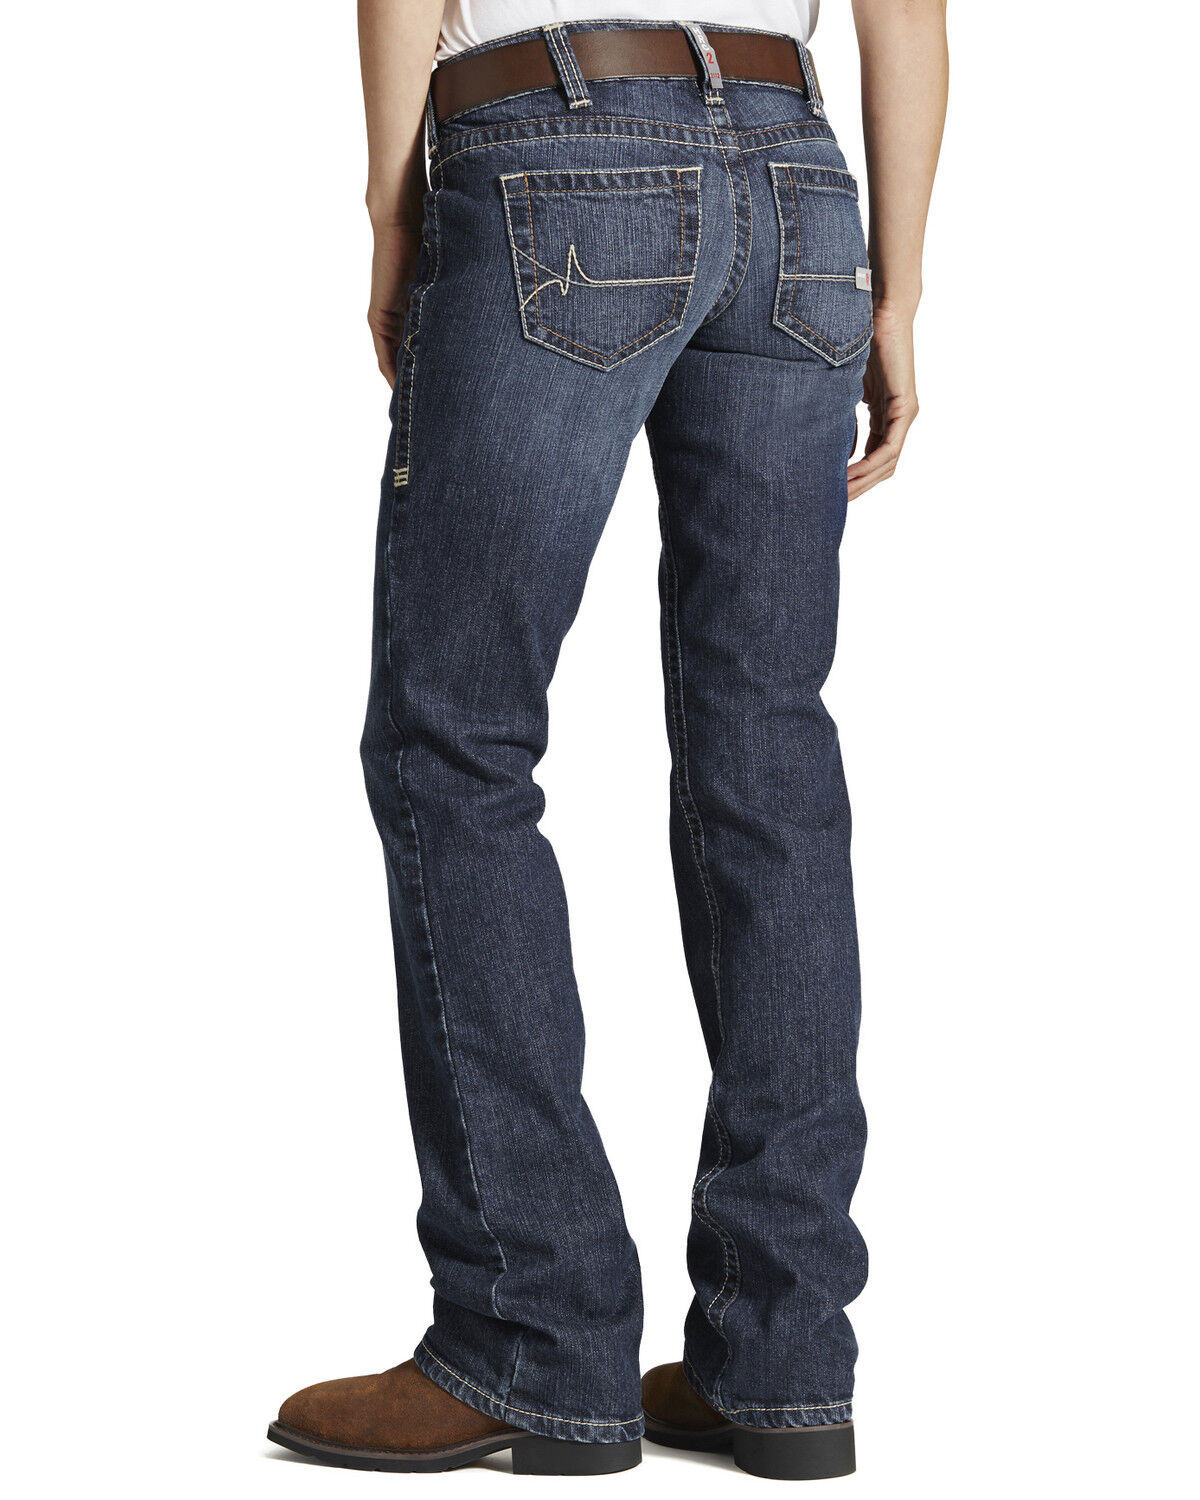 ARIAT Womens Flame Resistant Inherentwork Utility Pants 